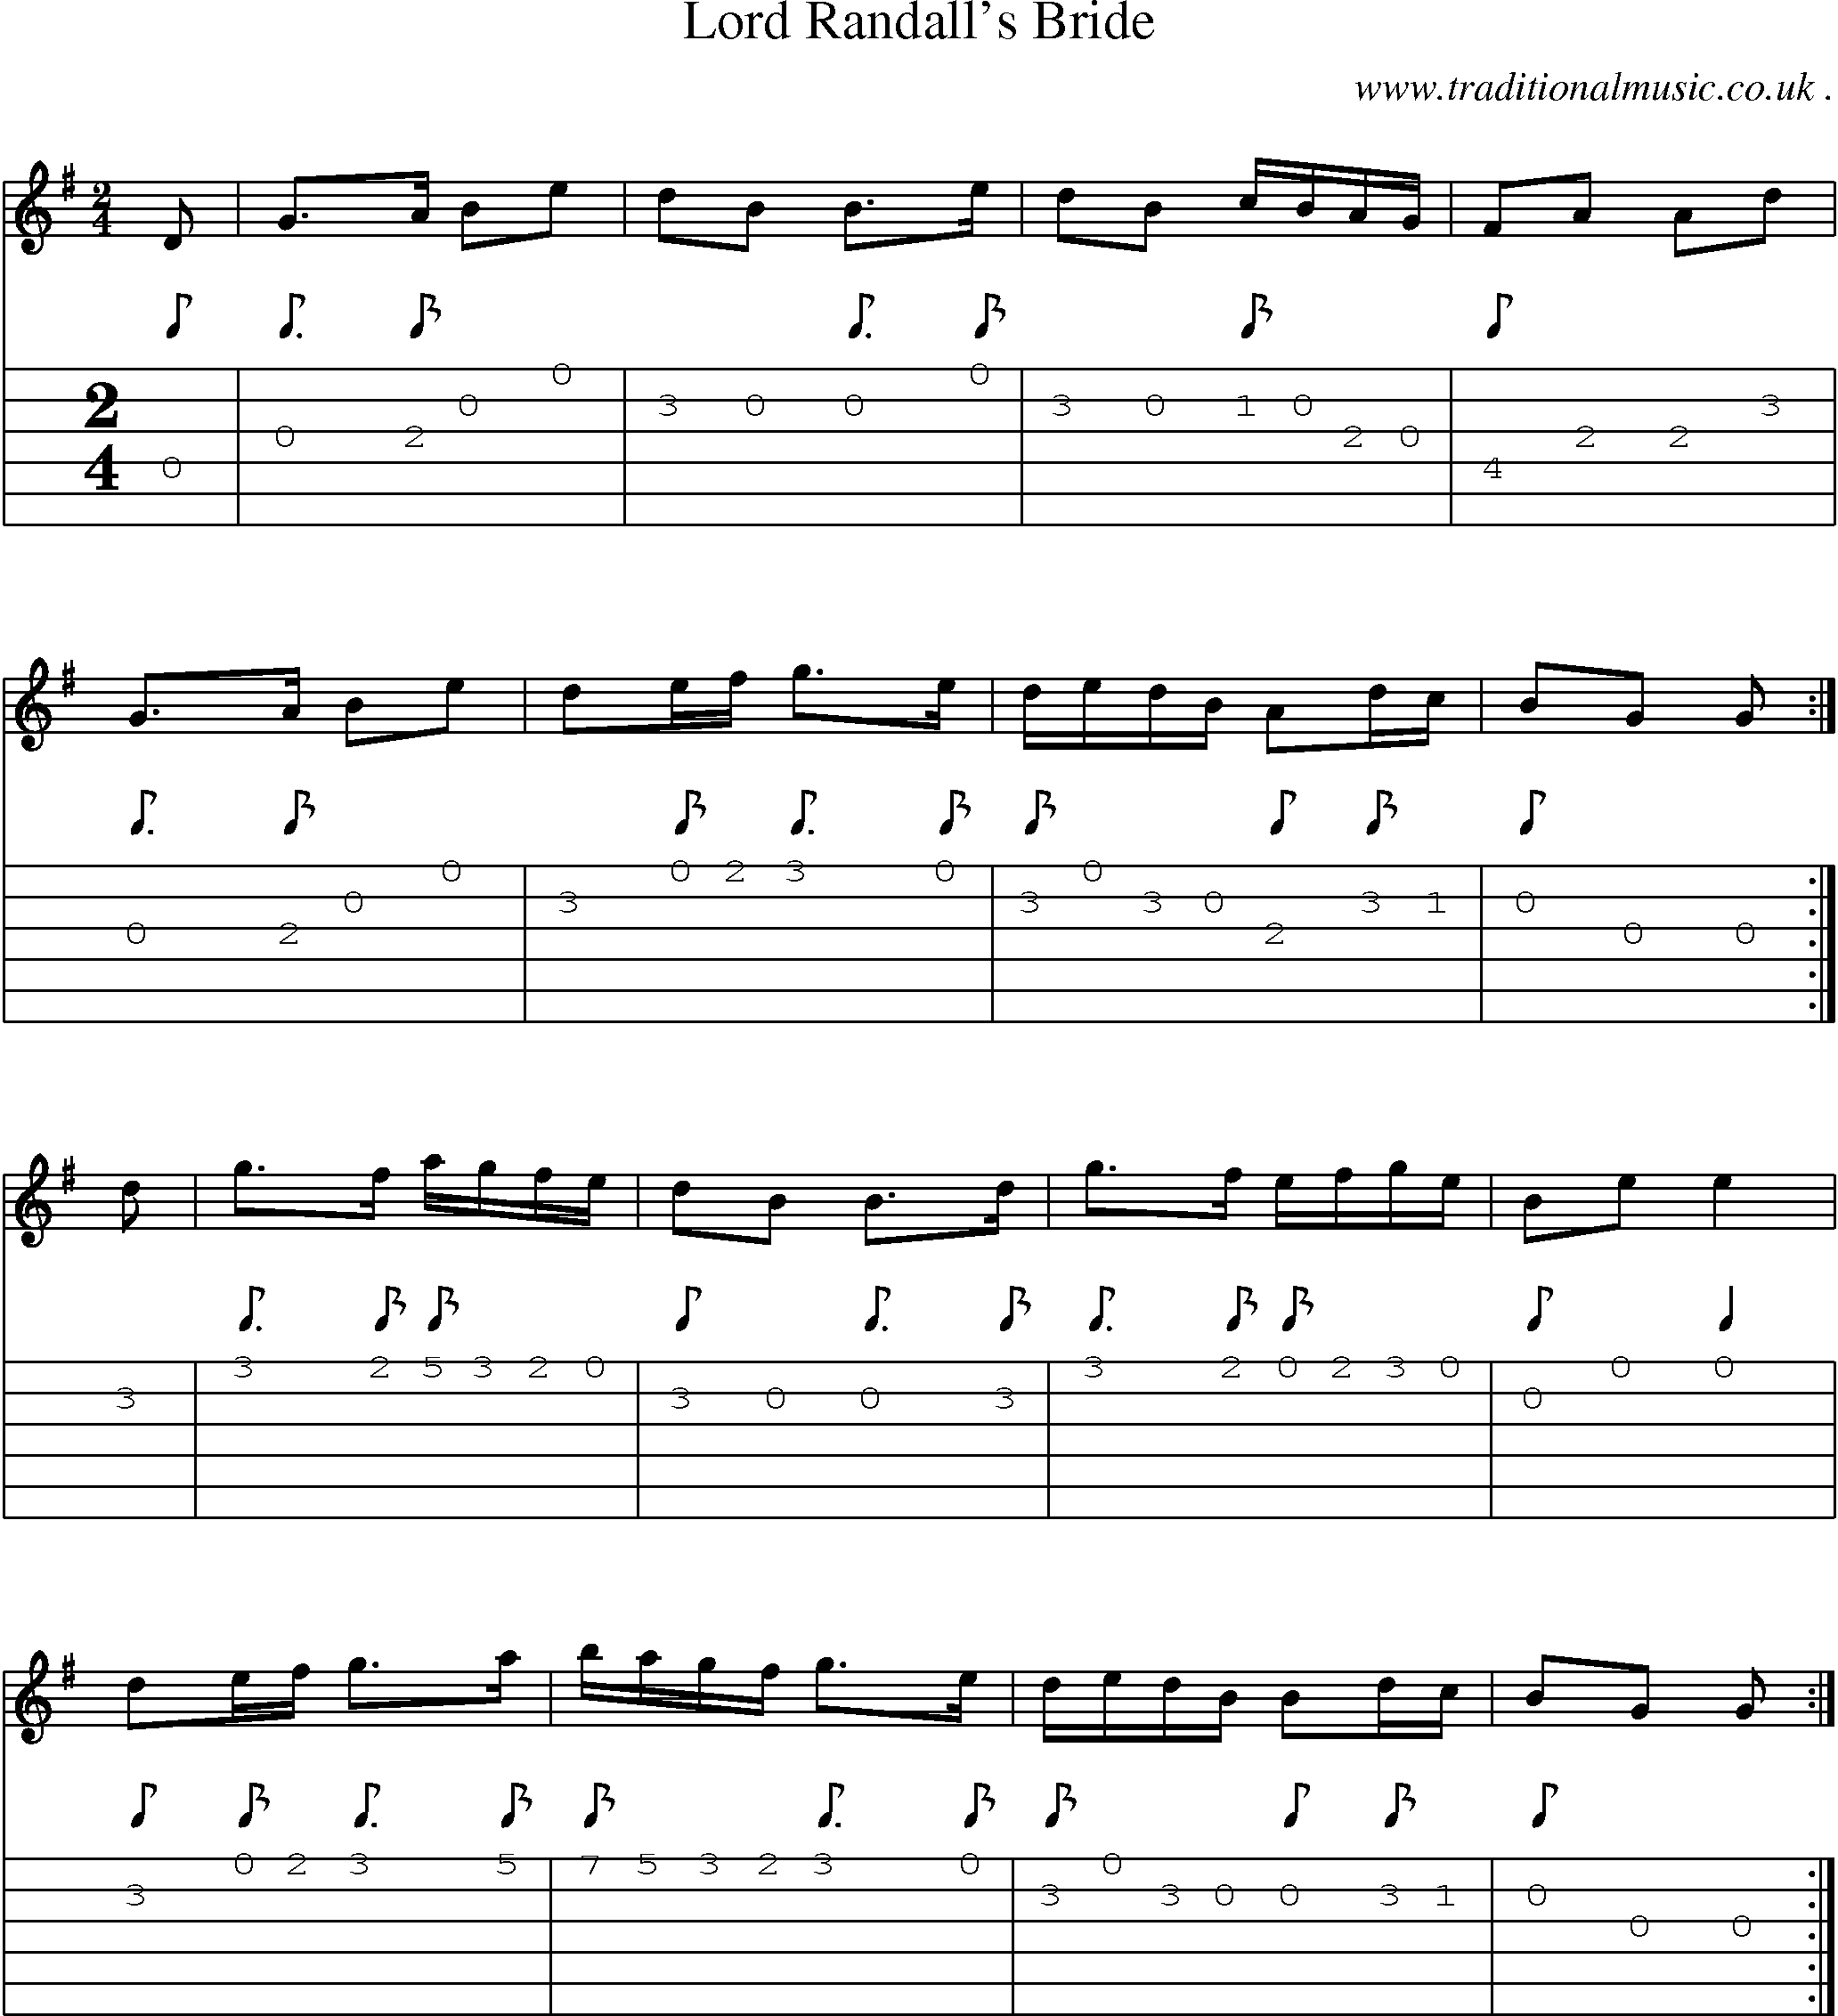 Sheet-music  score, Chords and Guitar Tabs for Lord Randalls Bride